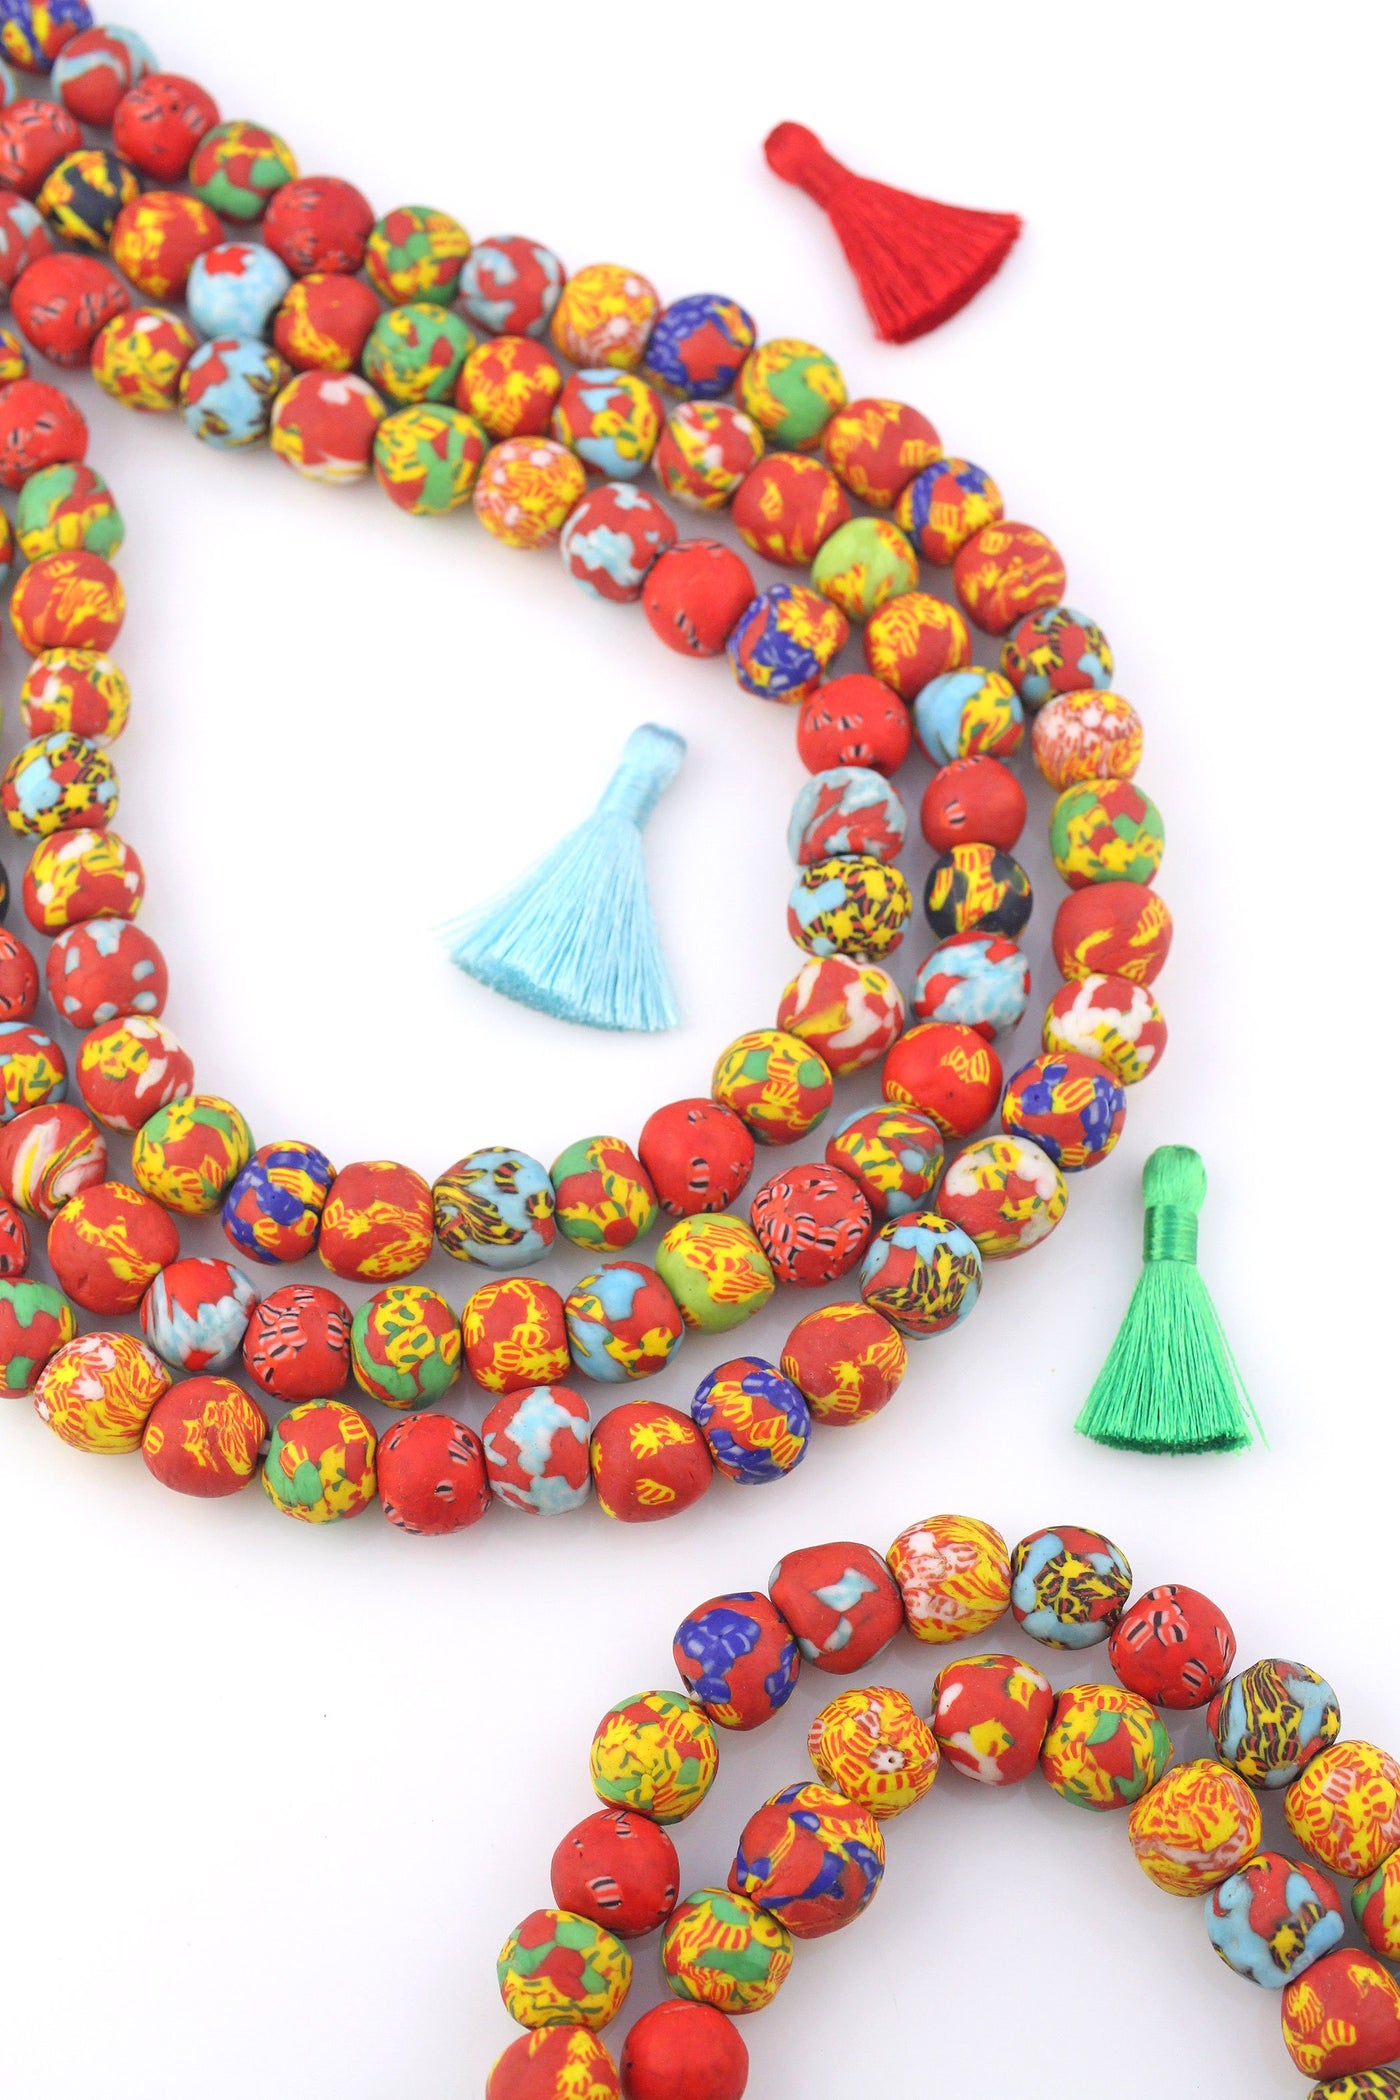 18-20mm Round Multi-Colored Recycled Mosaic Sandcast Ghana Glass Beads